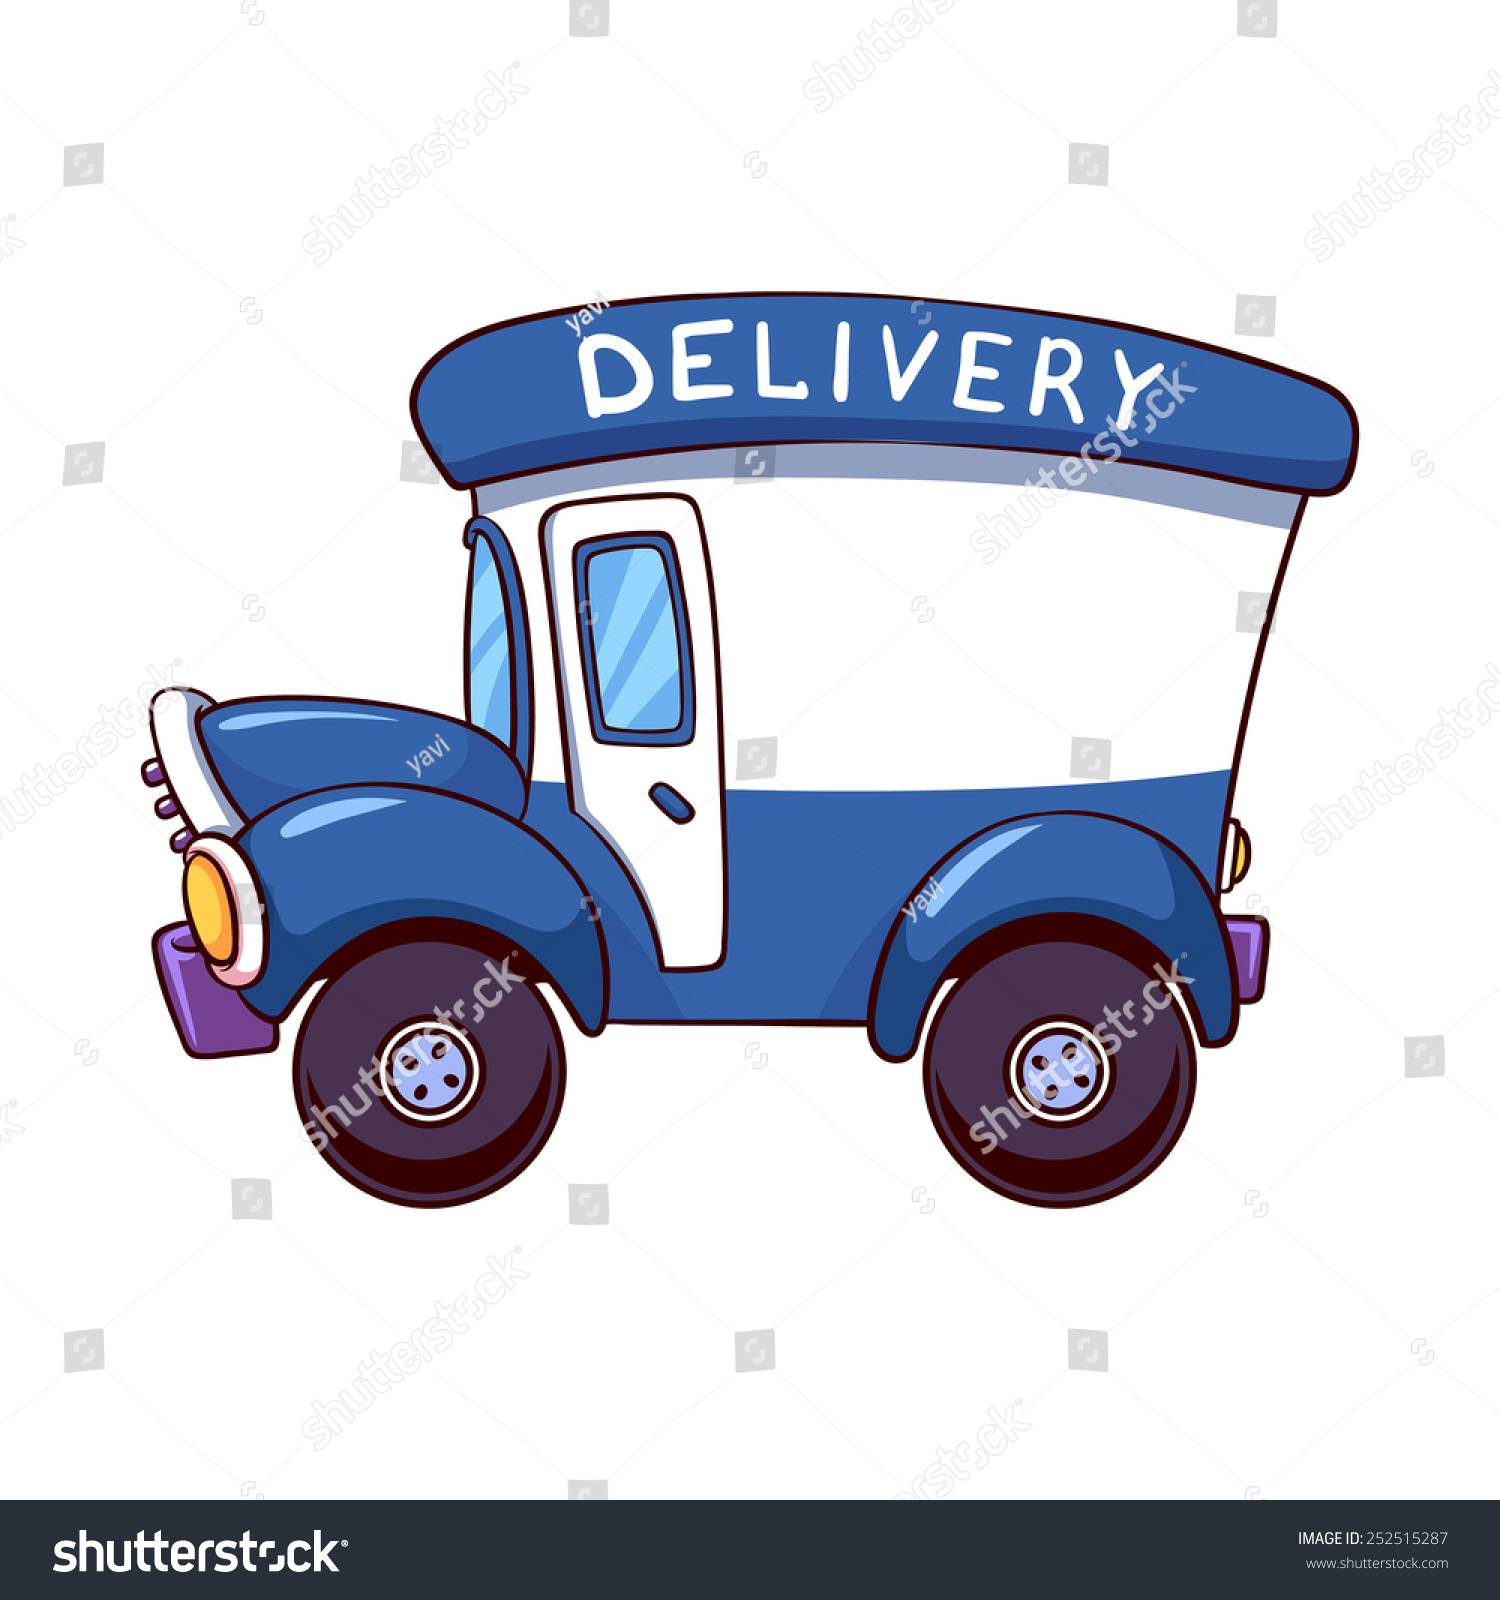 home delivery clipart - photo #3